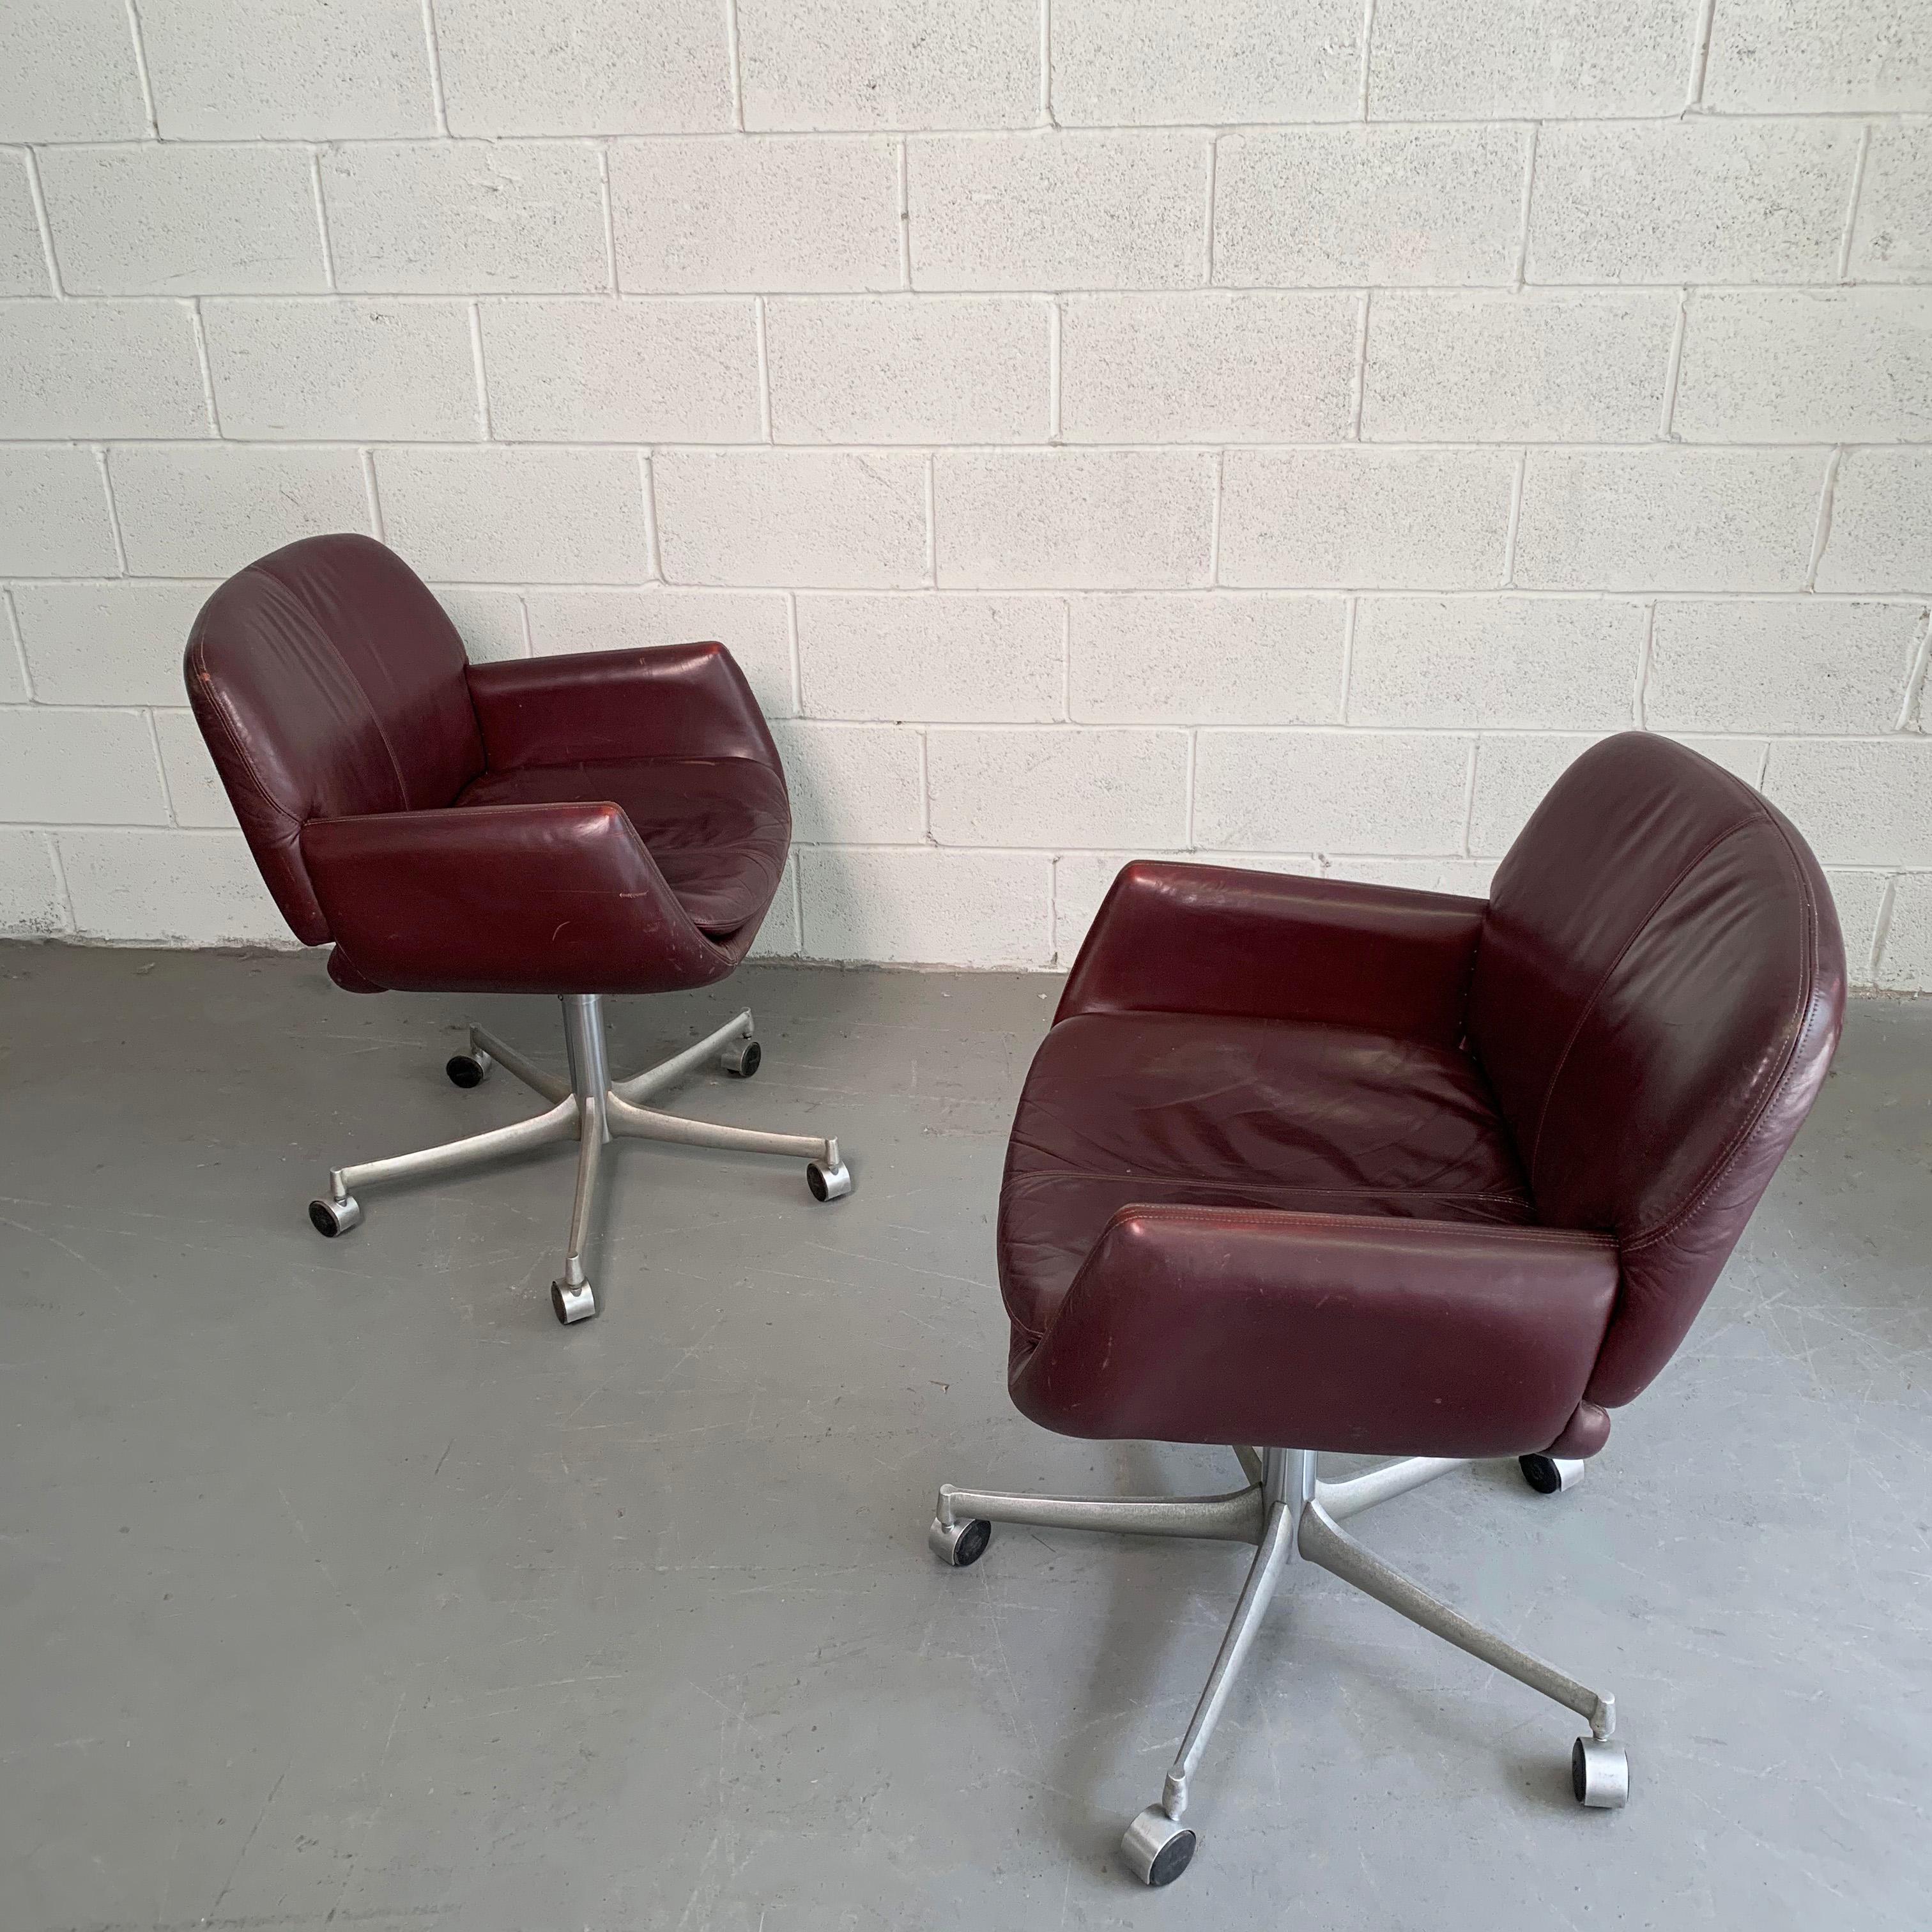 Pair of Mid-Century Modern, office armchairs feature burgundy leather, swivel seats on rolling aluminum bases.